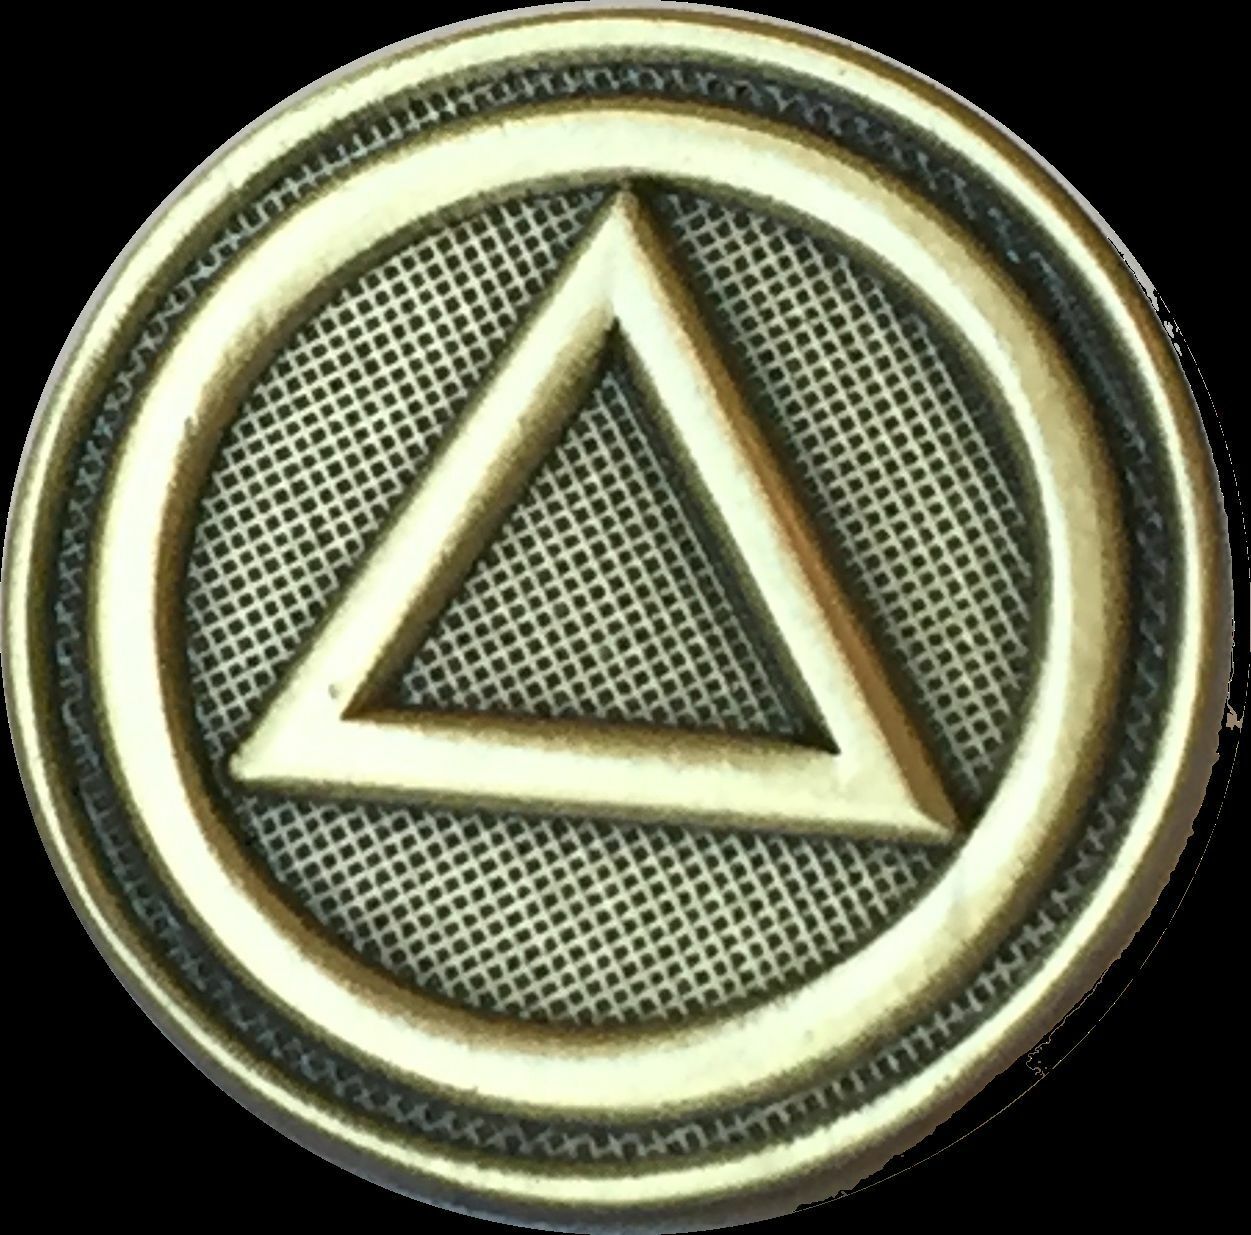 AA Circle Triangle Lapel Pin Alcoholics Anonymous Sobriety Badge Tie Collar Pin